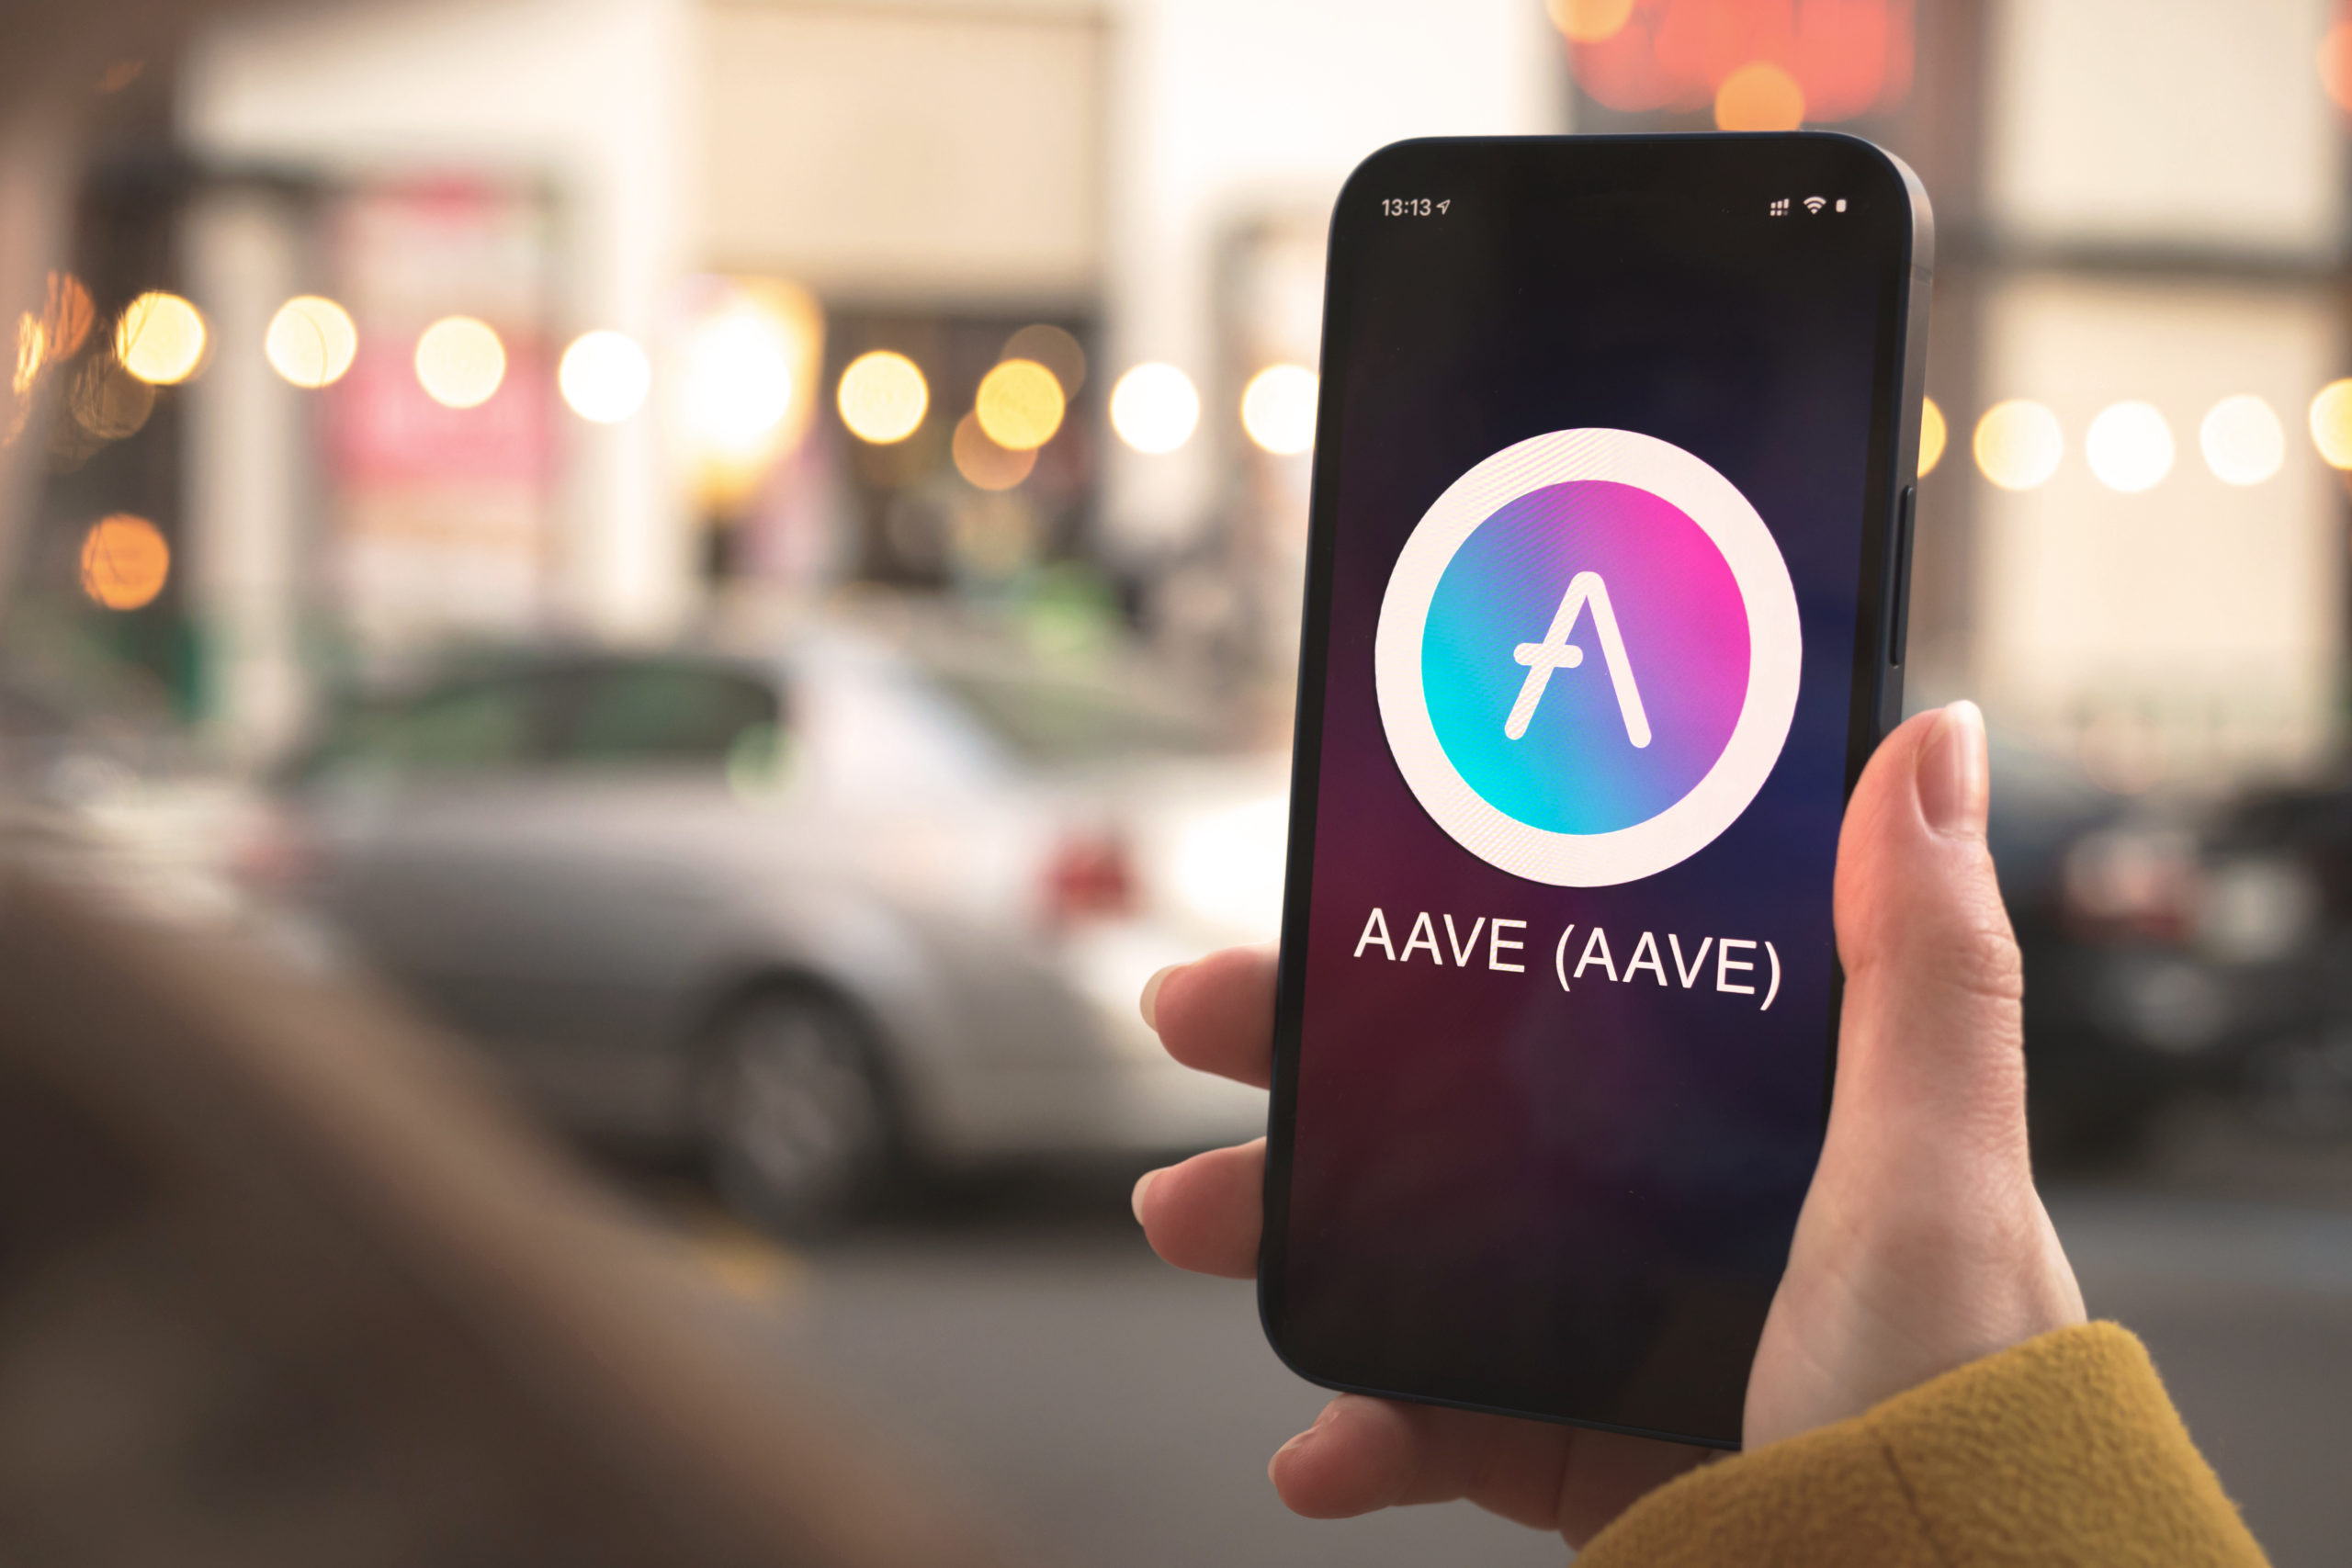 aave symbol logo smartphone scaled 1 Aave adopts proposal to temporarily pause ETH borrowing